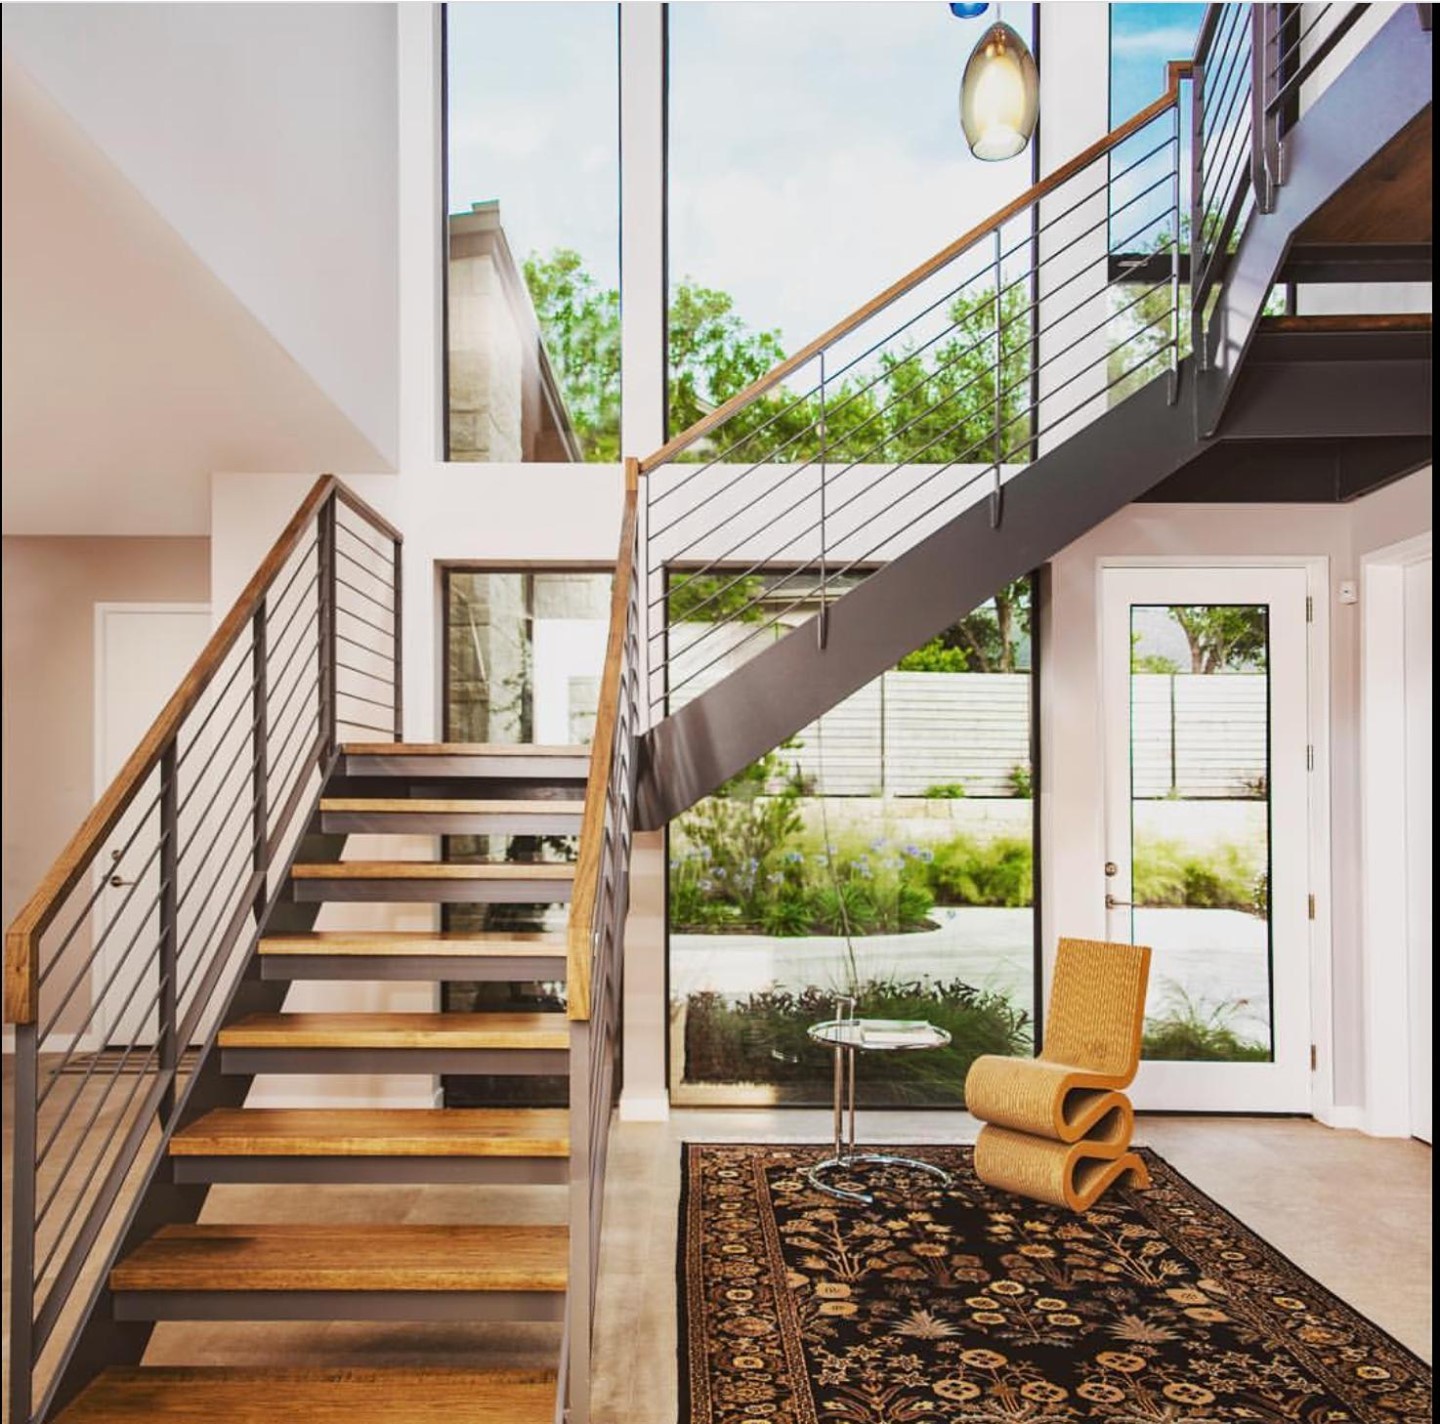 The staircase is just one of the highlights in this two story entry from a build back in 2016.⁠
⁠
Design by #greyformarchitecture⁠
Photo by @redpantsstudio